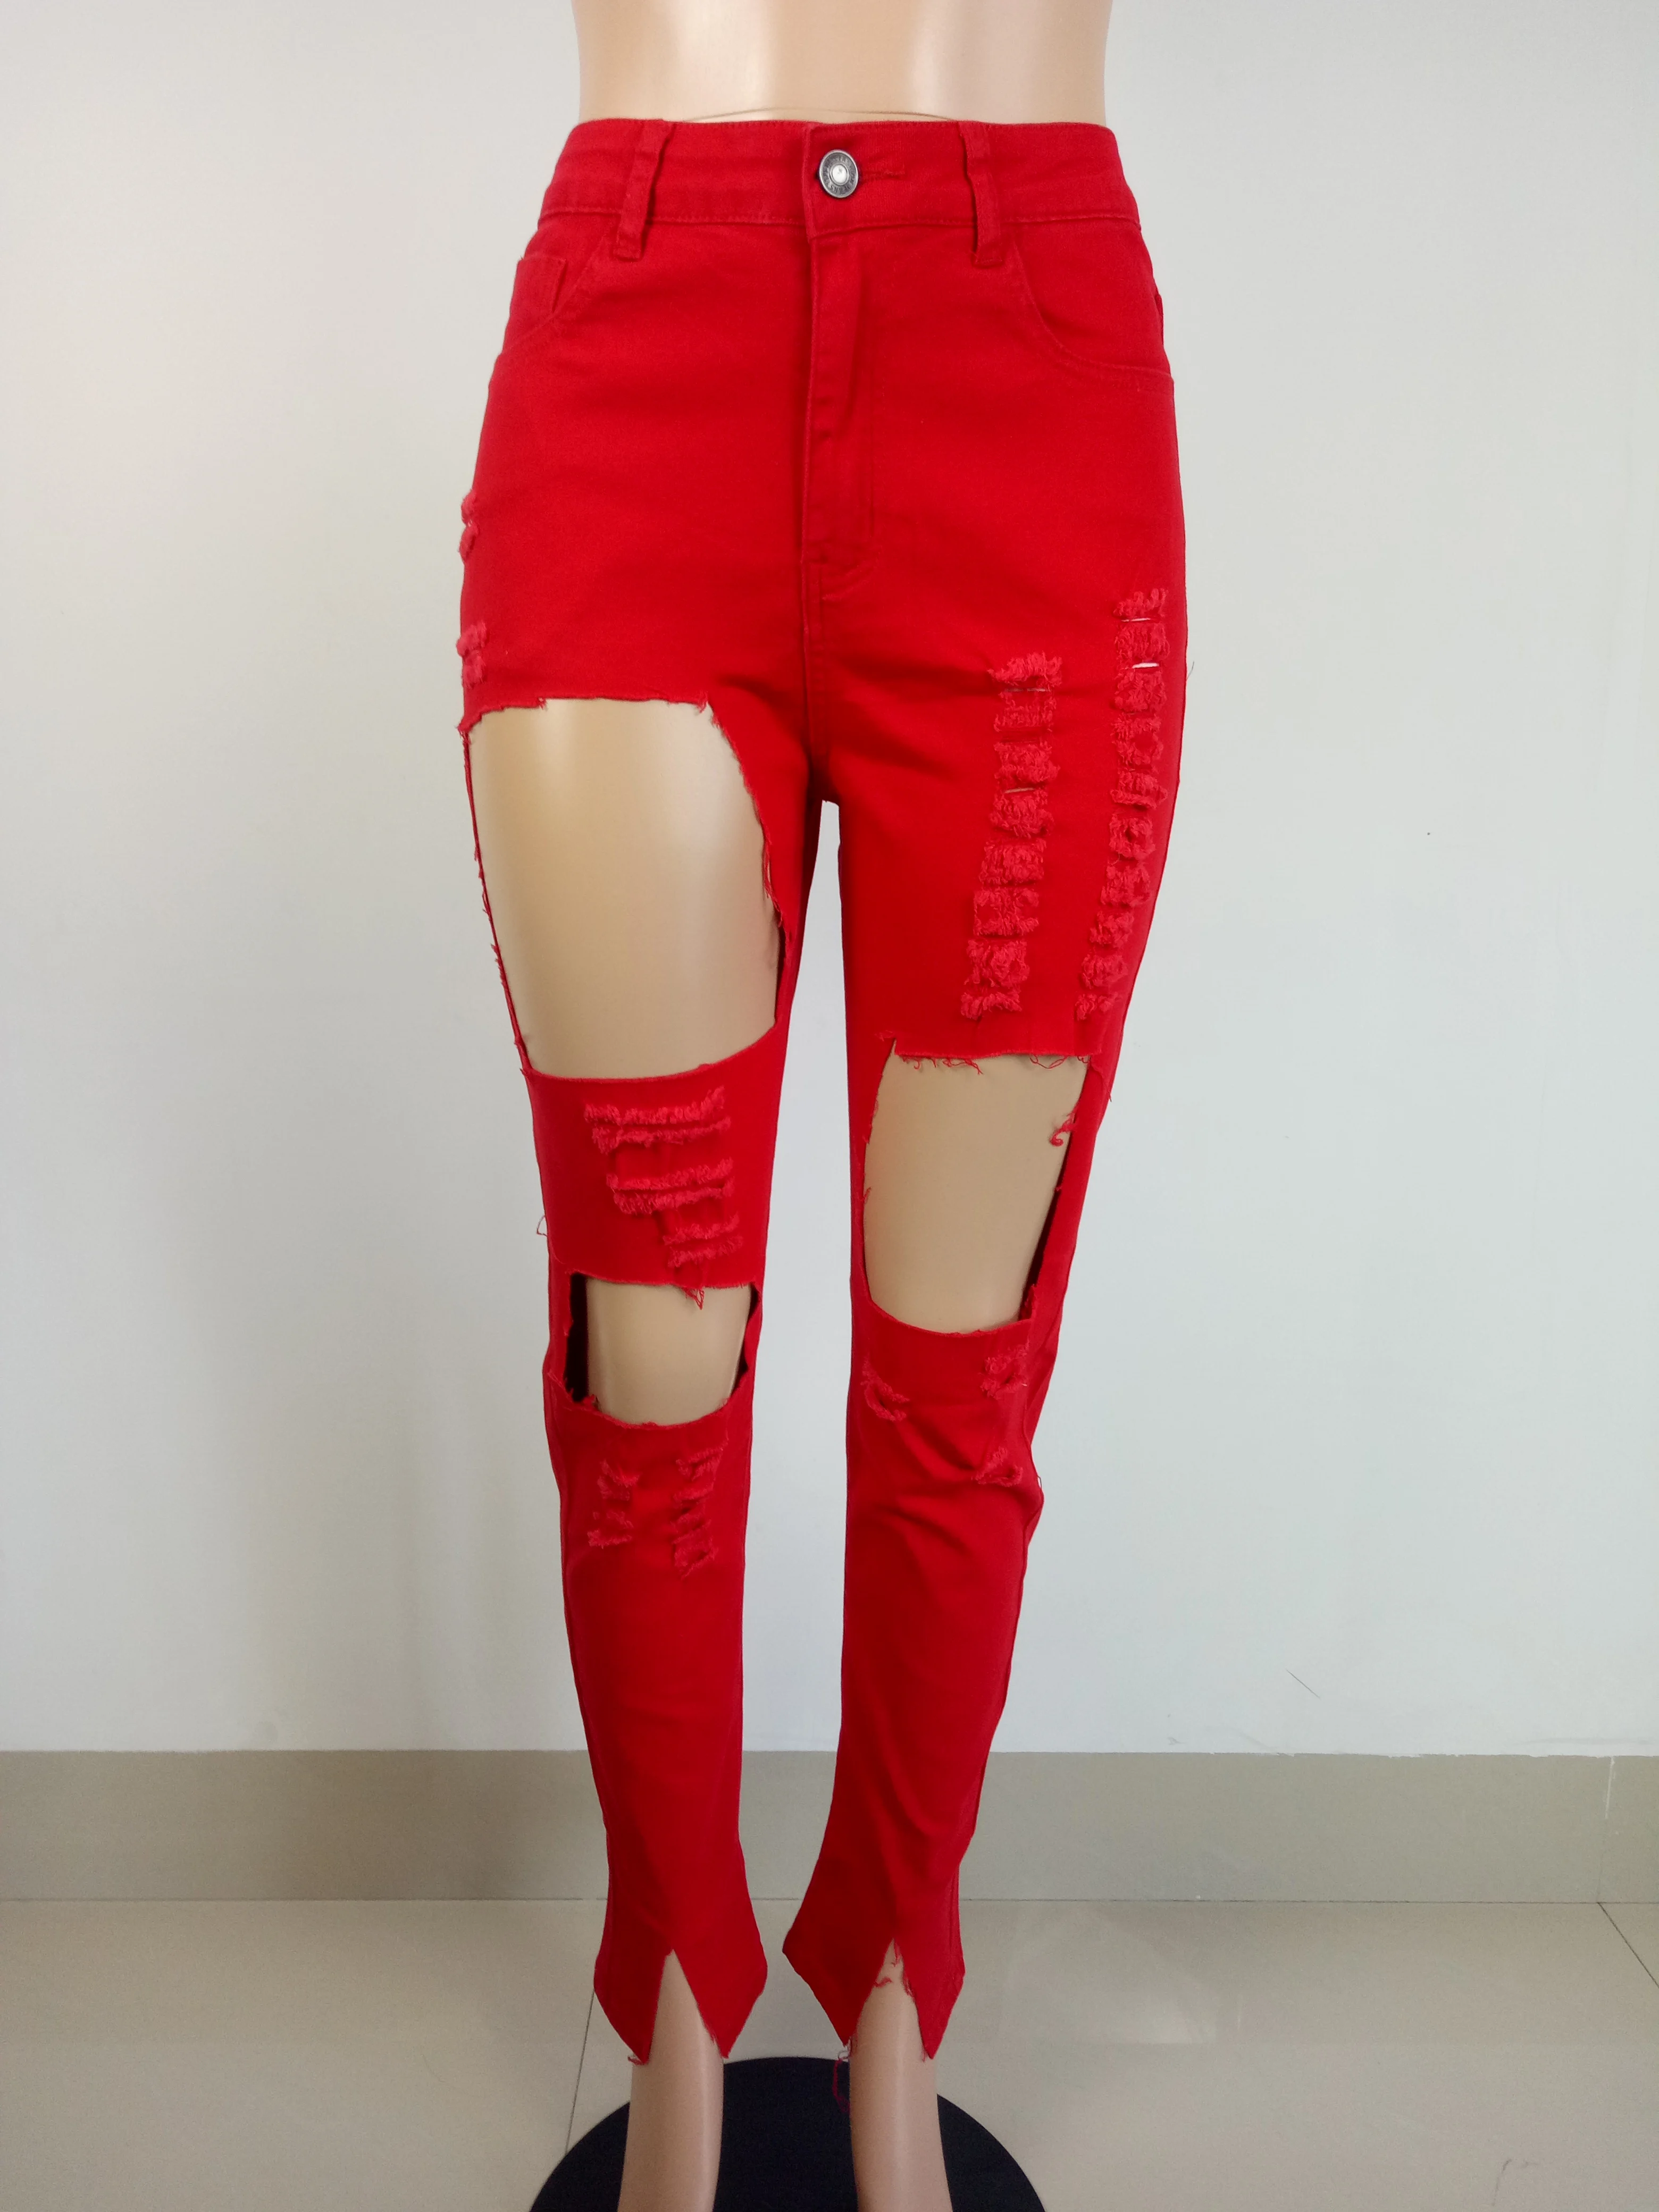 LS6391 tailored ripped fabrics jeans are fashionable for women's wear women jeans